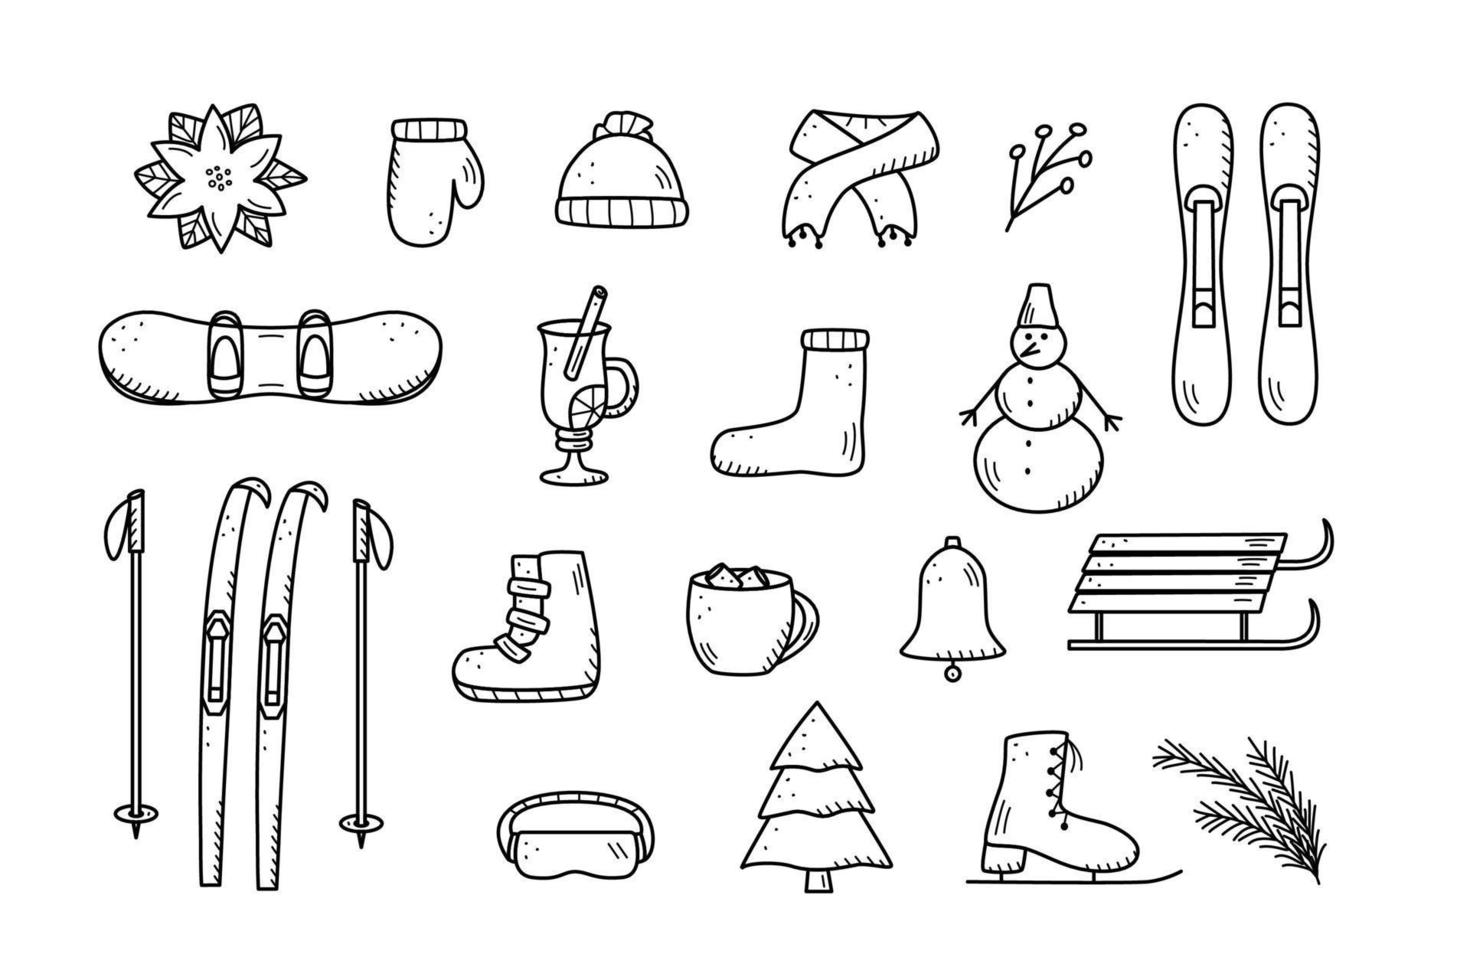 New Year and Christmas elements in the doodle style. Vector illustration of winter clothing, sports equipment, spruce, food and drinks. Winter vacation icons